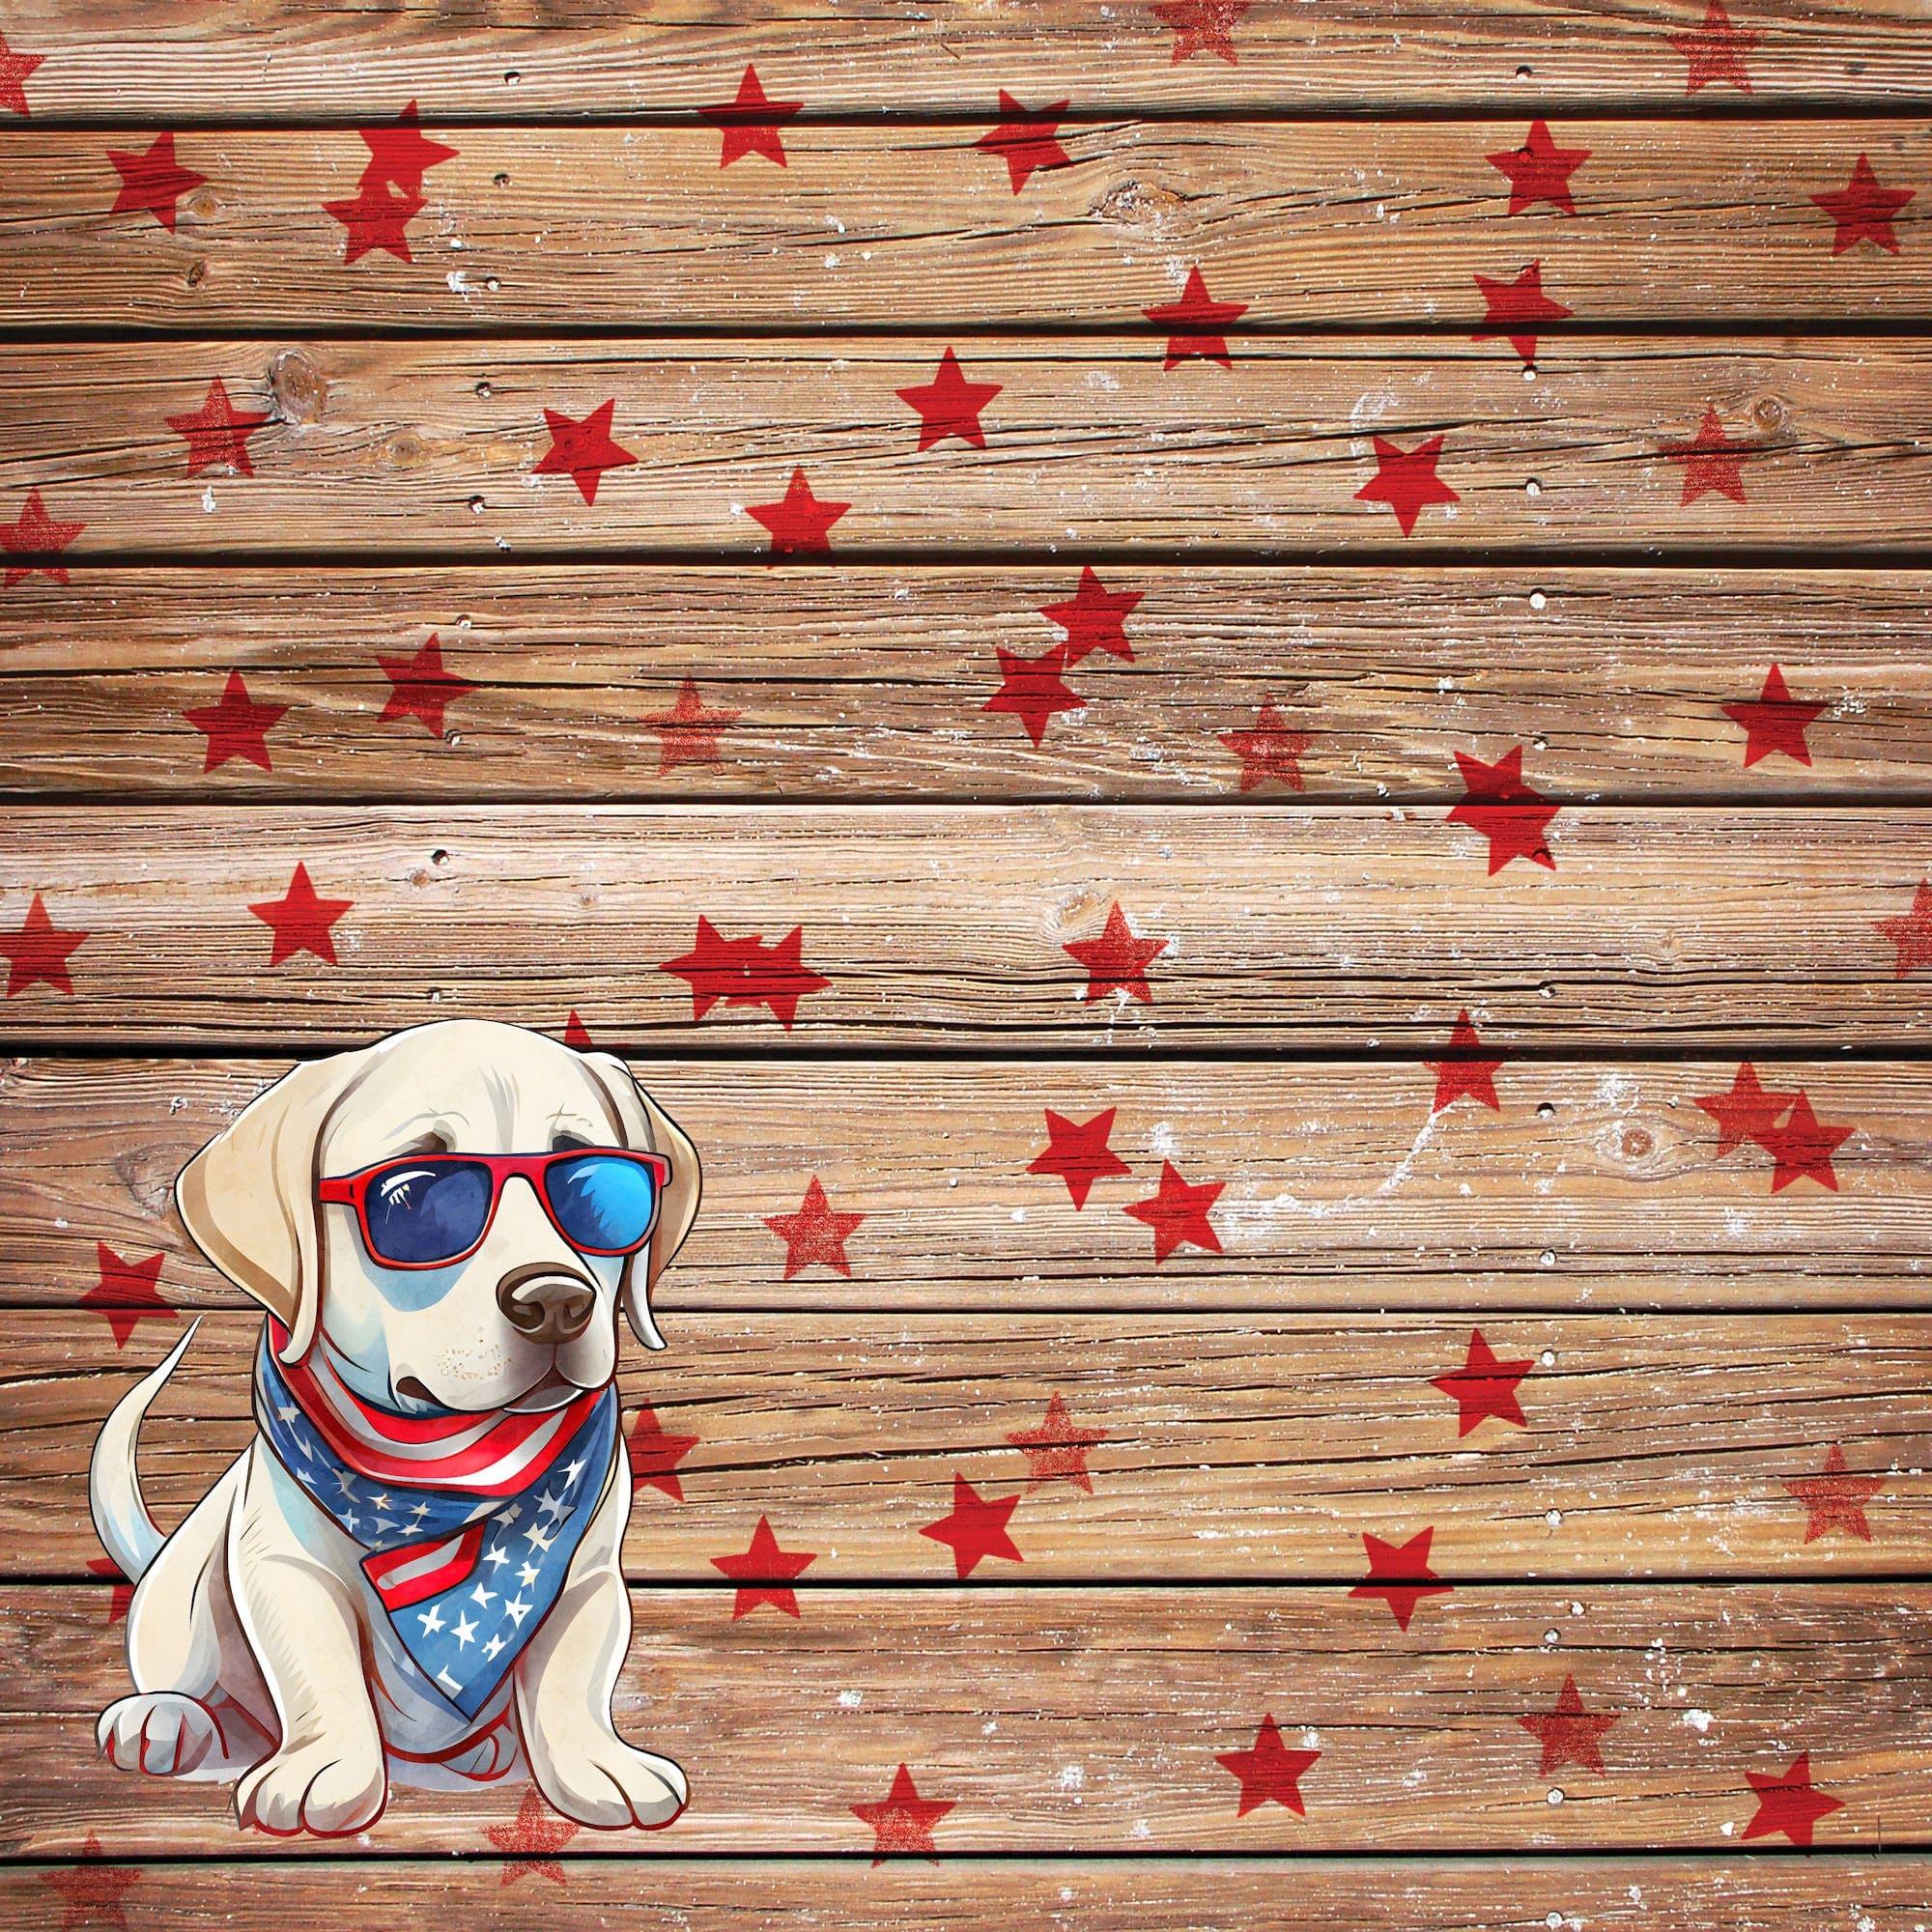 Patriotic Pups Collection Labrador Retriever 12 x 12 Double-Sided Scrapbook Paper by SSC Designs - Scrapbook Supply Companies